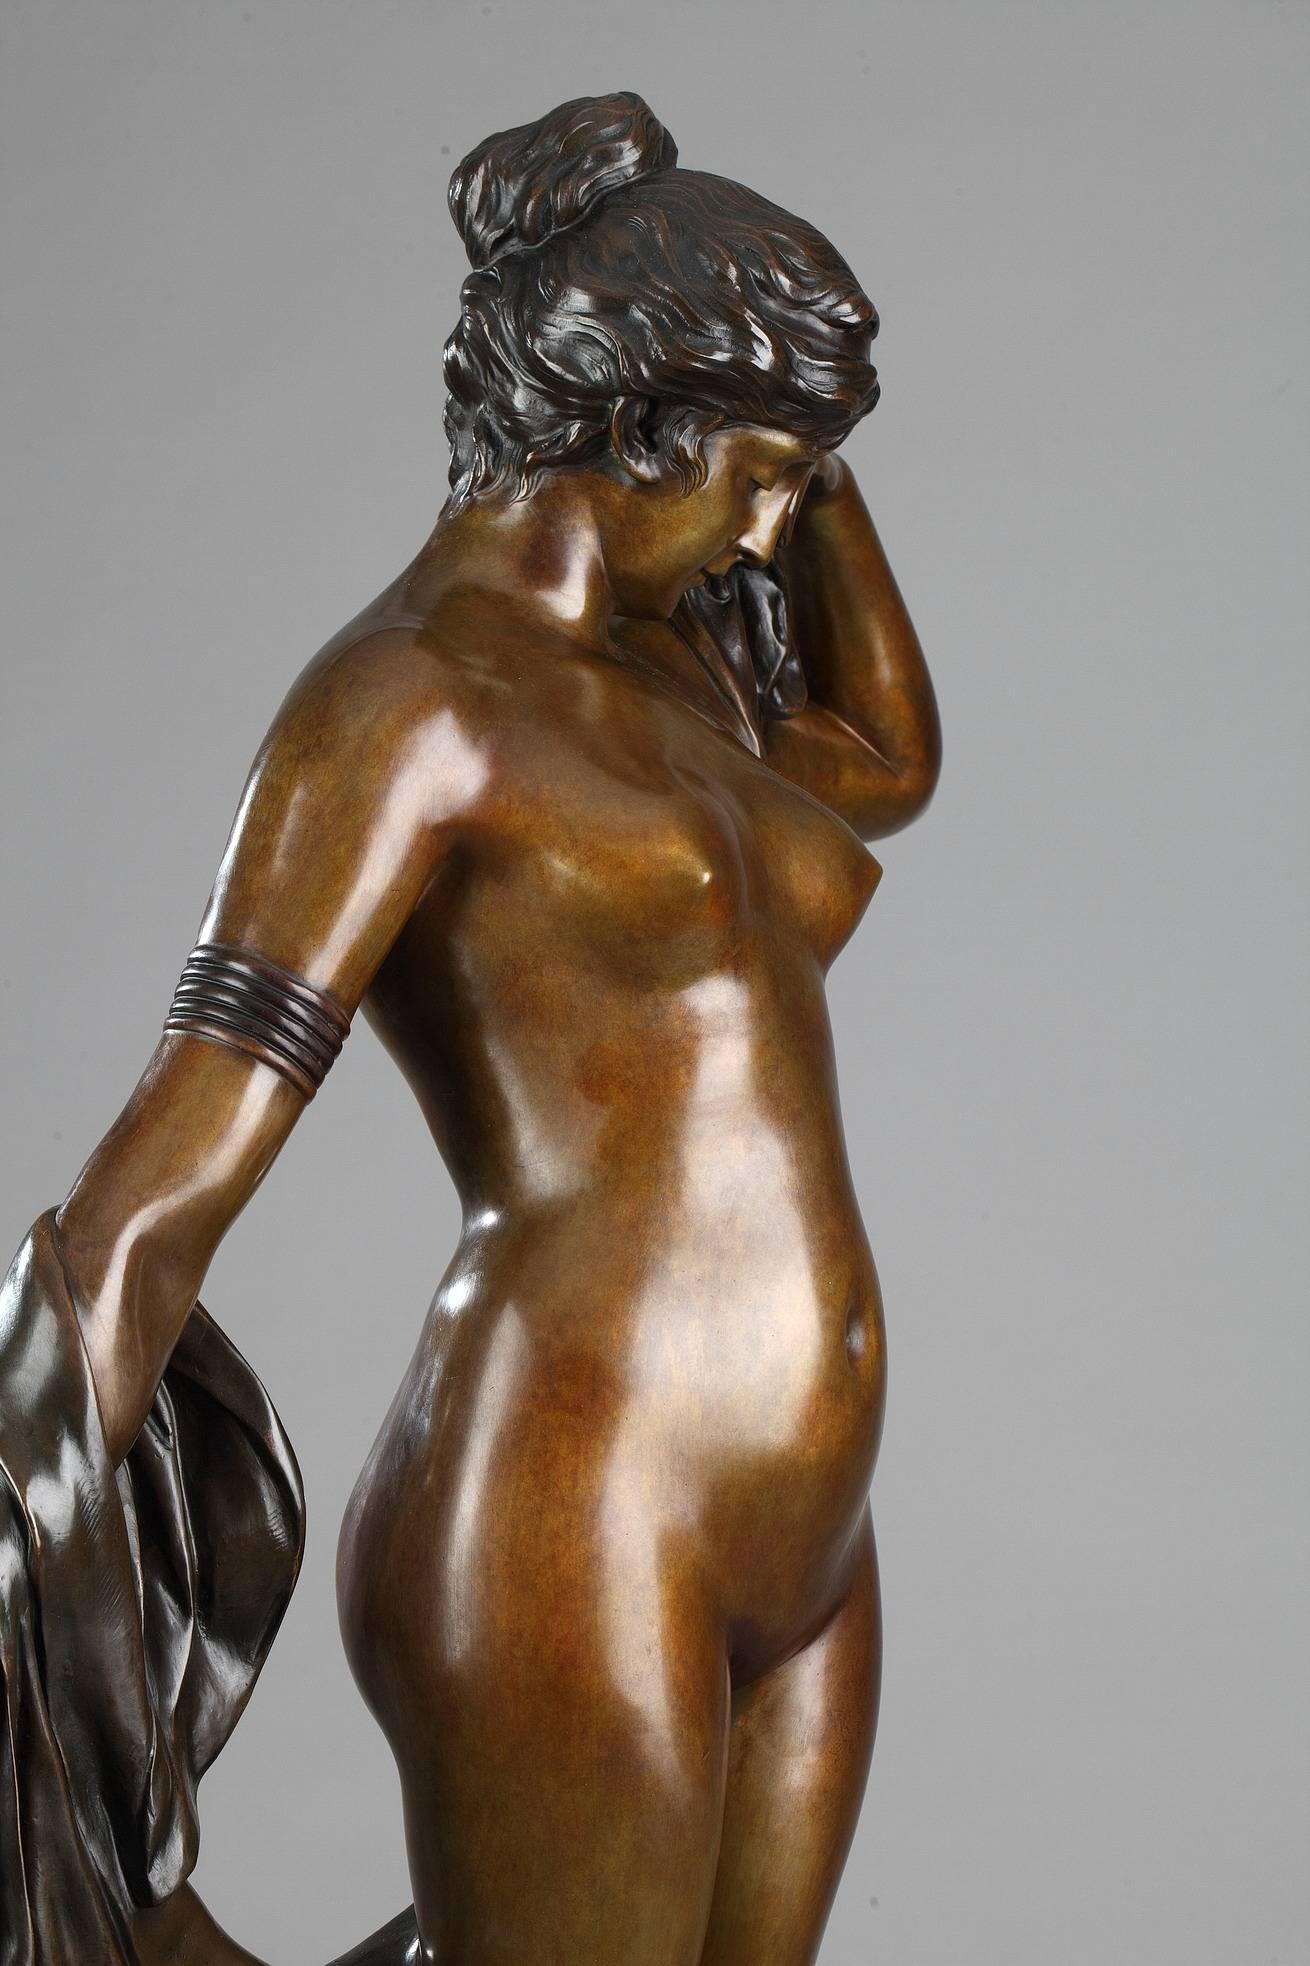 Large antique nude female bronze sculpture with brown patina: Phryne Before Her Judges; by Pierre-Etienne Daniel Campagne (French, 1851-1910).
 
Campagne worked primarily in Paris where he was a student of Falguière. He first exhibited in the